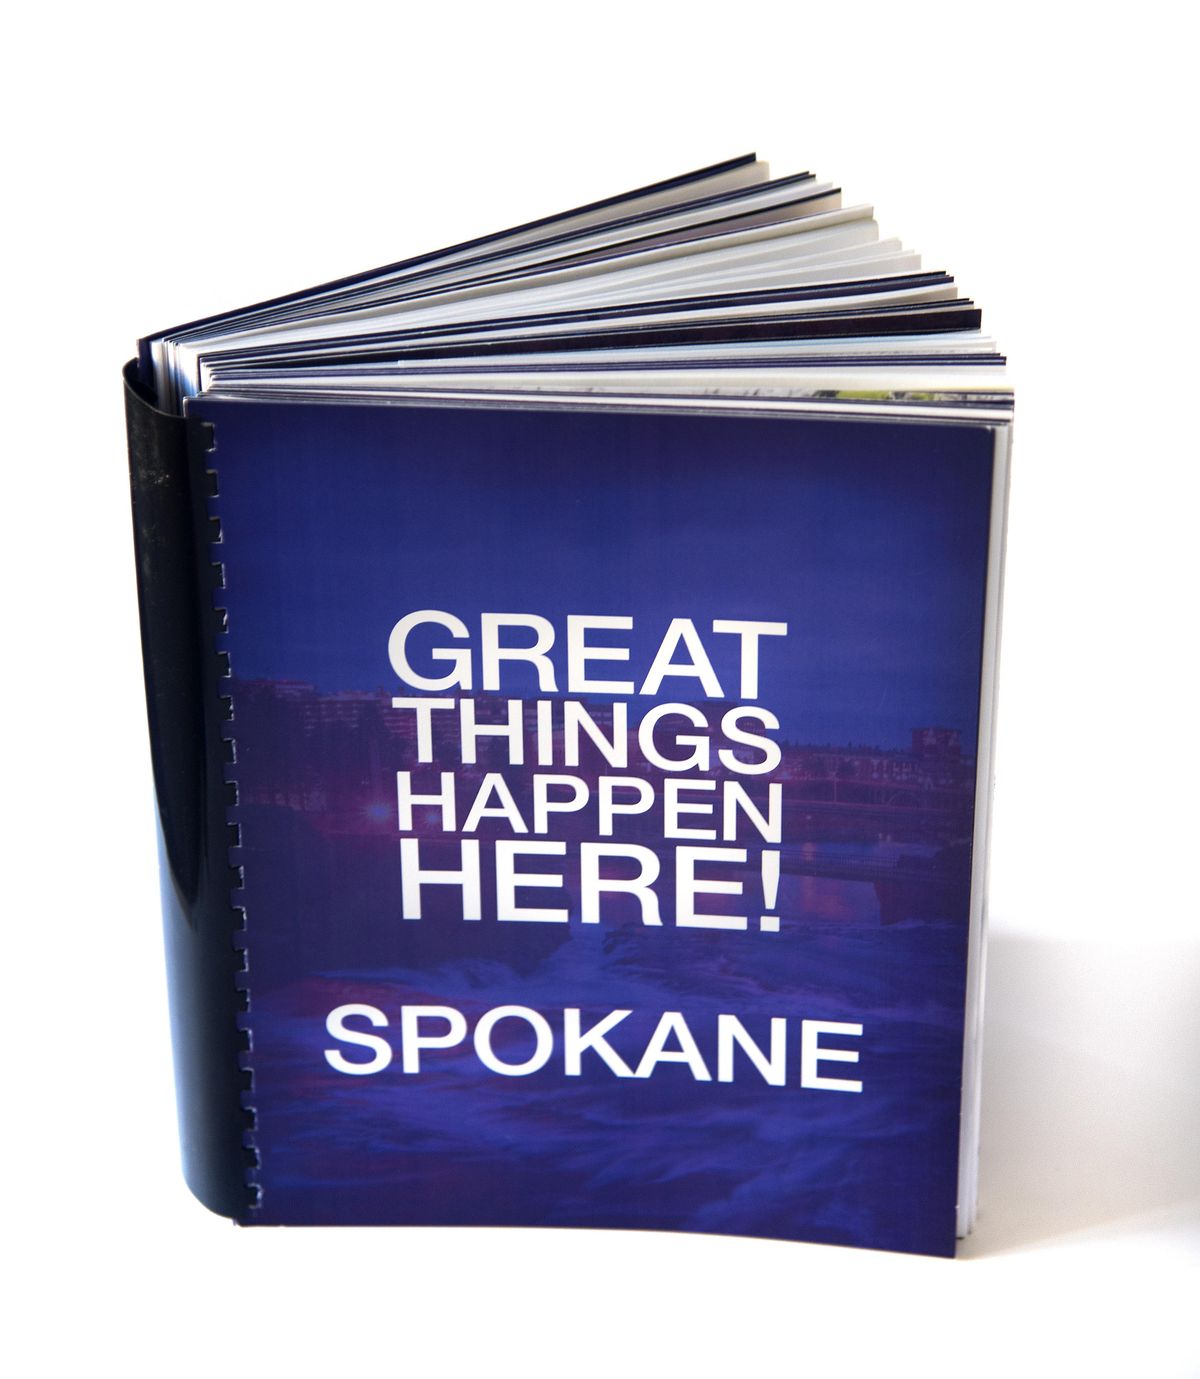 Greater Spokane Incorporated’s proposal to to Amazon. (Dan Pelle / The Spokesman-Review)